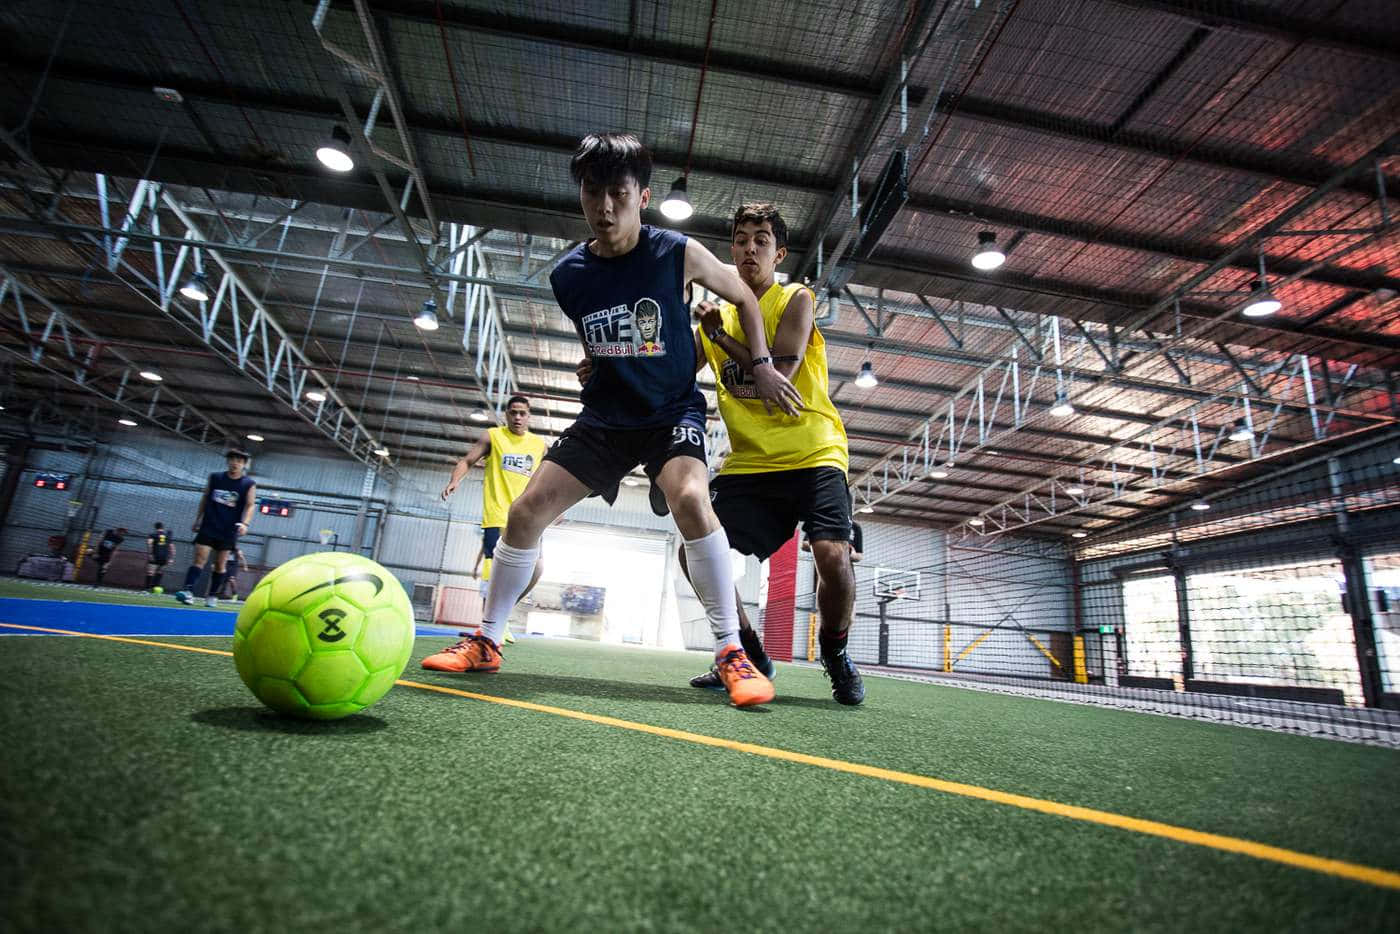 Fast-paced Indoor Soccer Action Wallpaper